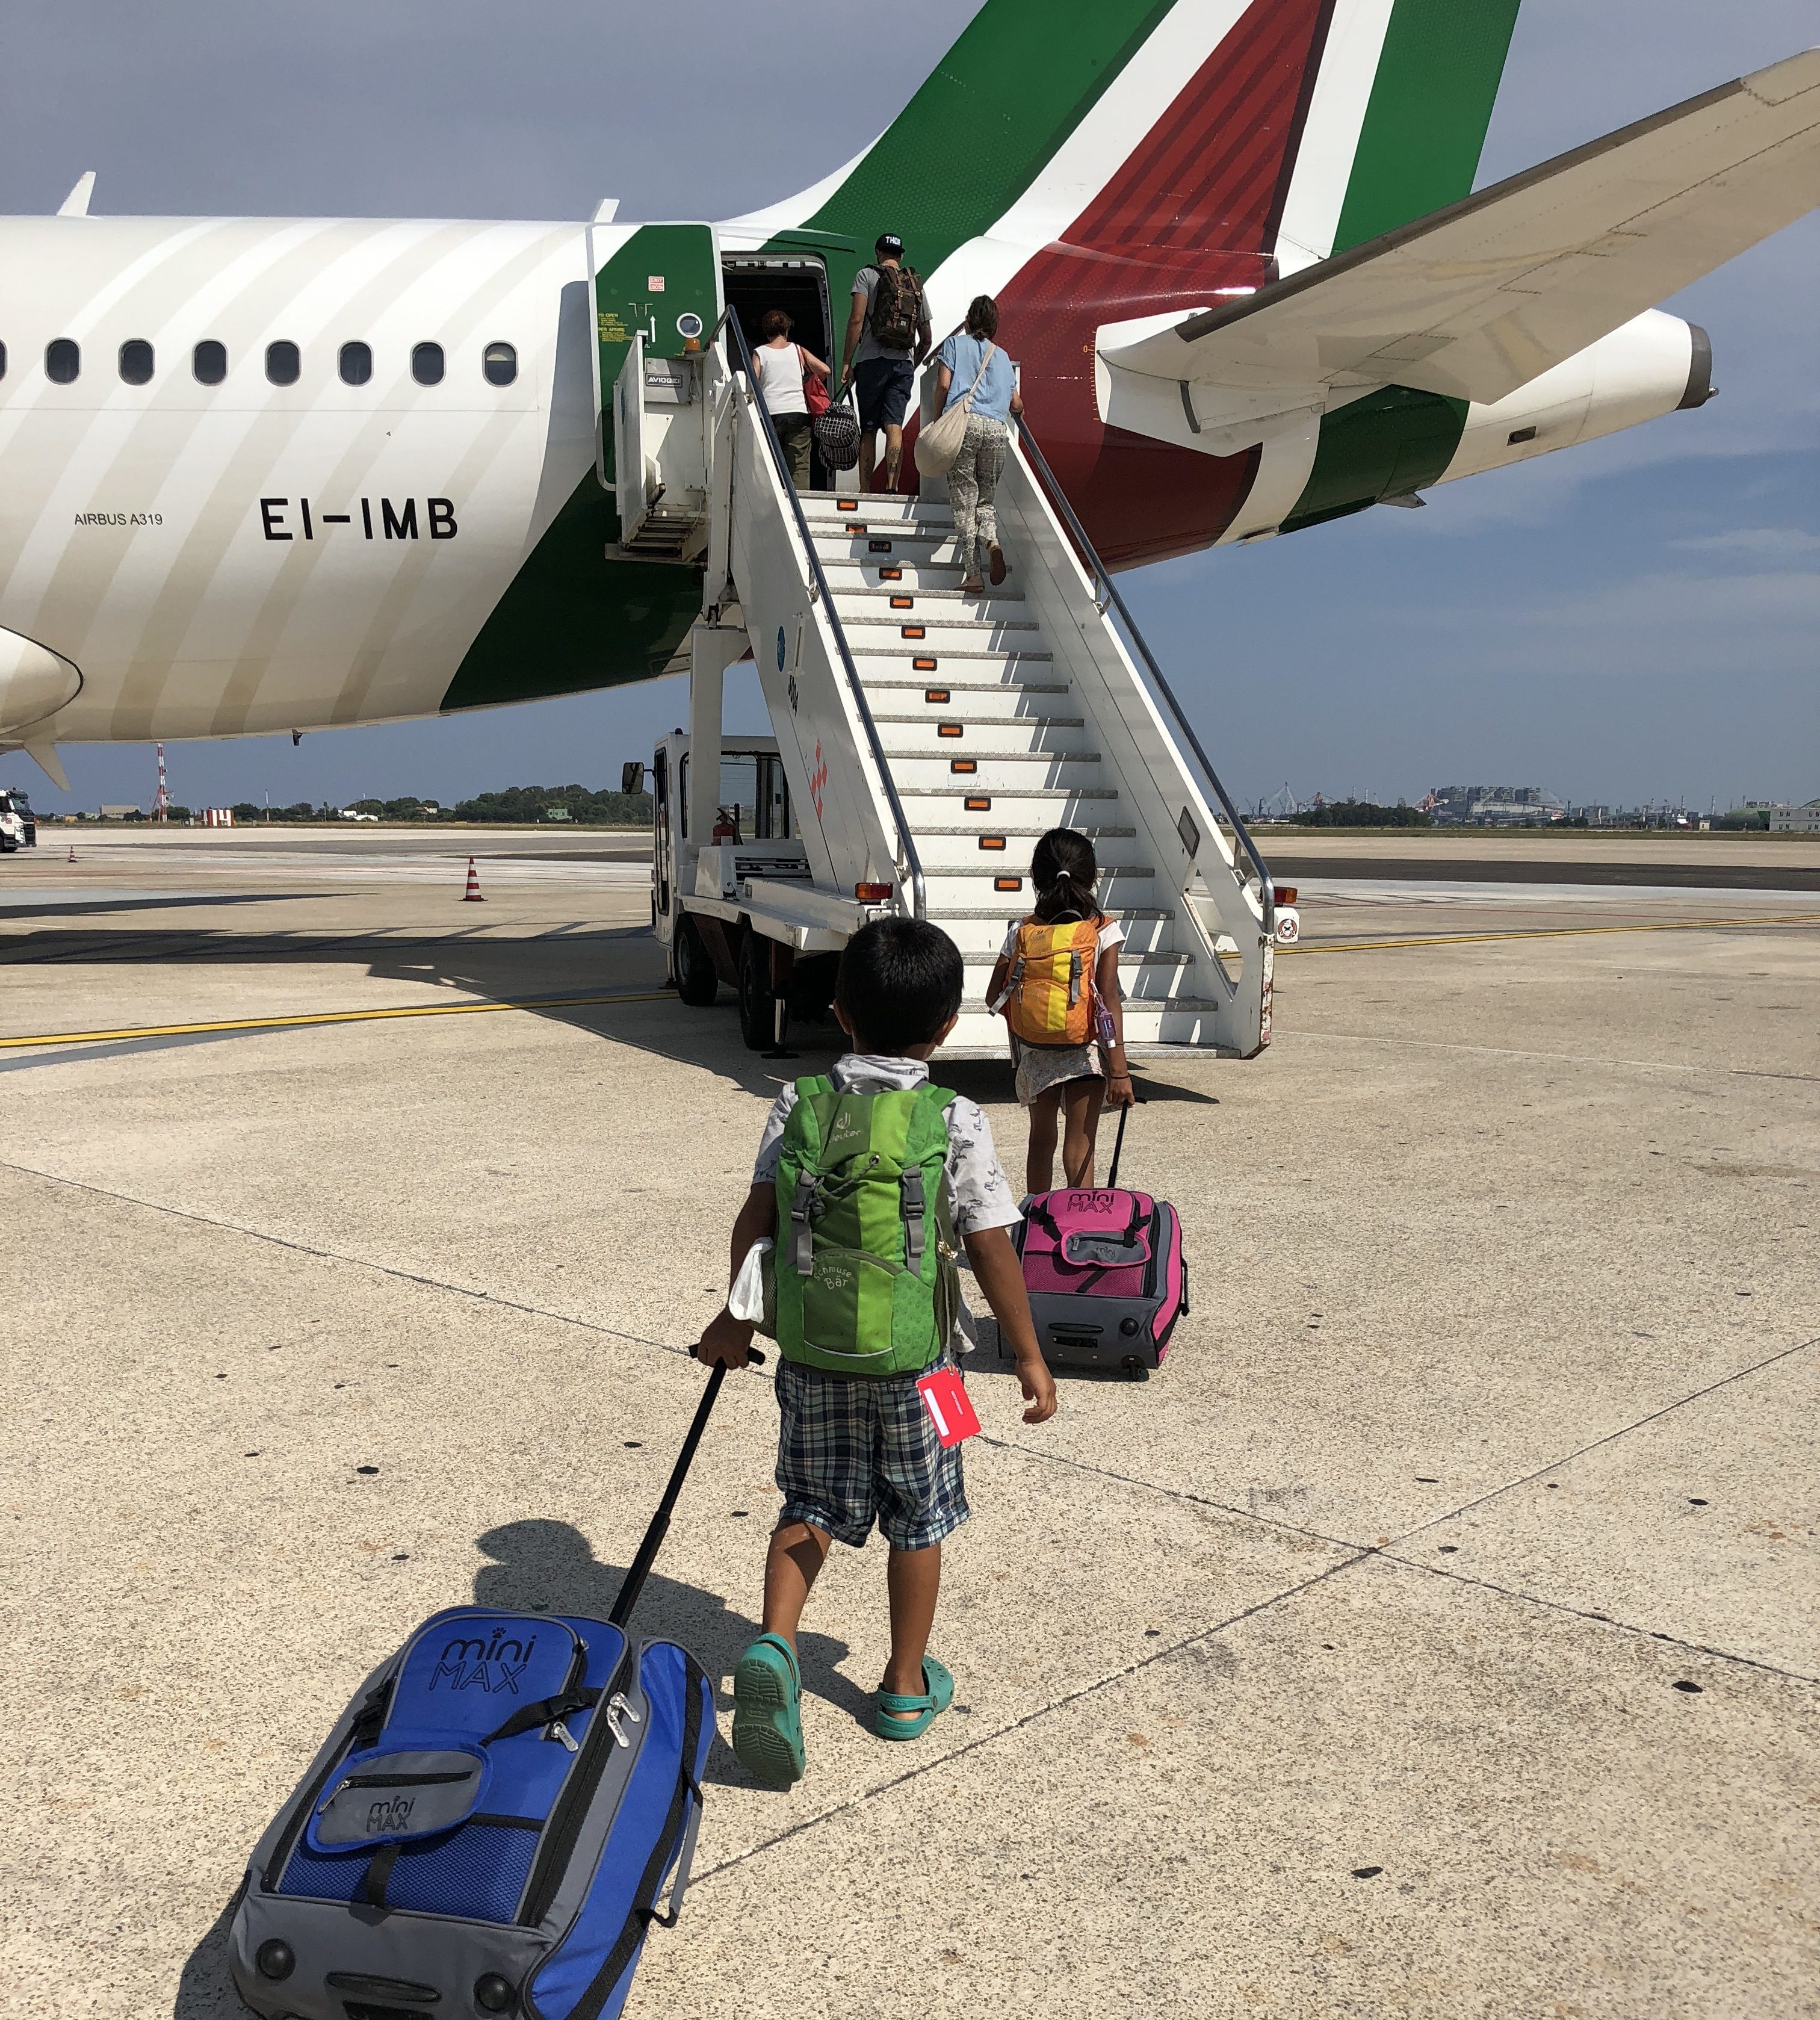 two kids travelling, suitcases and backpacks, boarding a plane from tarmack